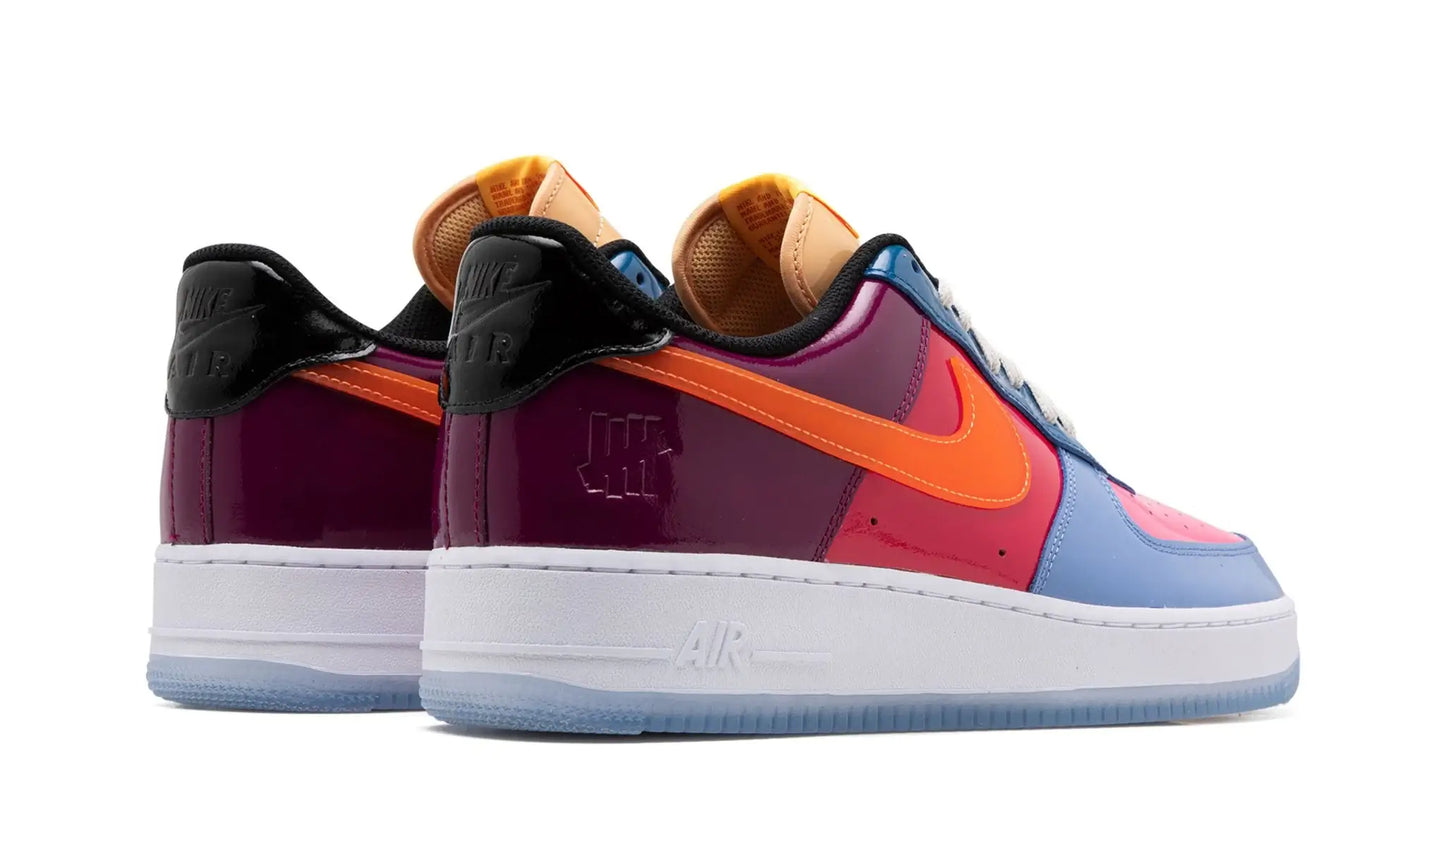 Tênis Air Force 1 x Undefeated "Multicolor" Colorido